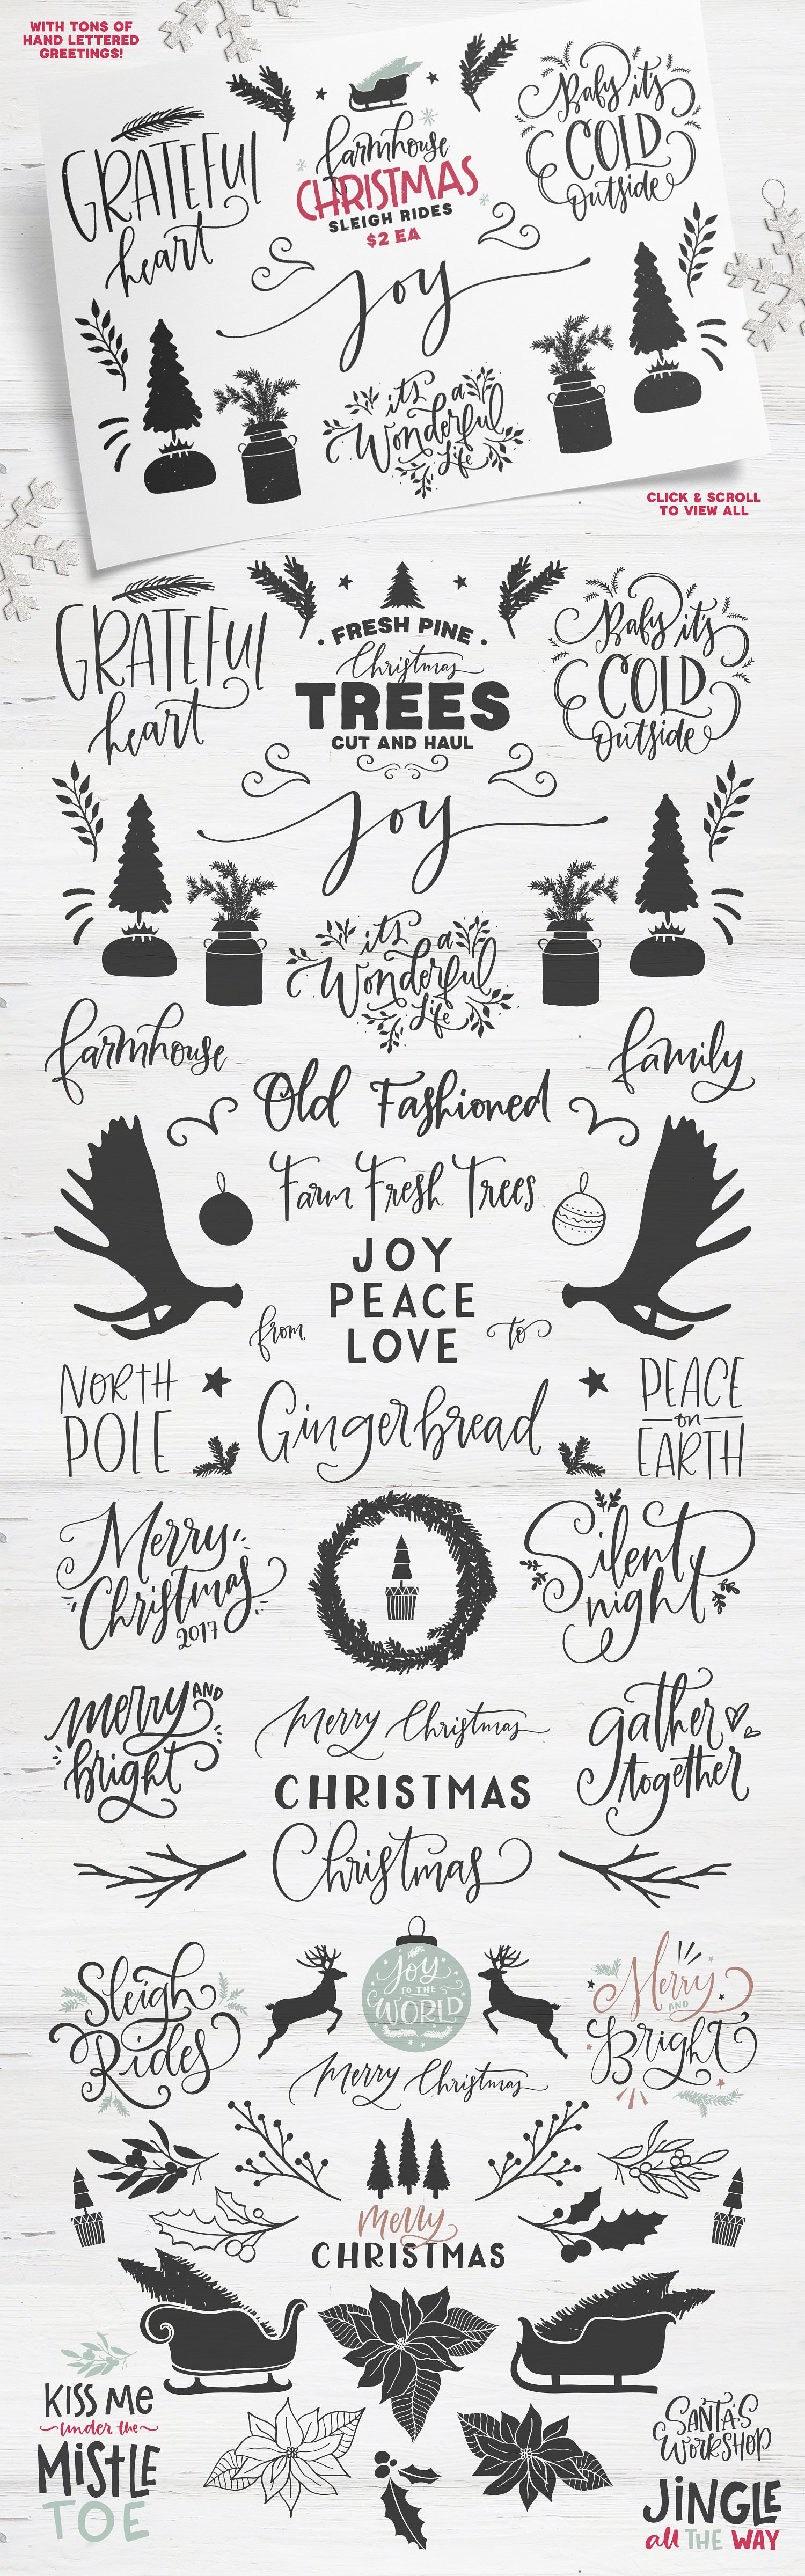 Farmhouse themed holiday graphics for holiday projects. Included pine trees and lettered phases.